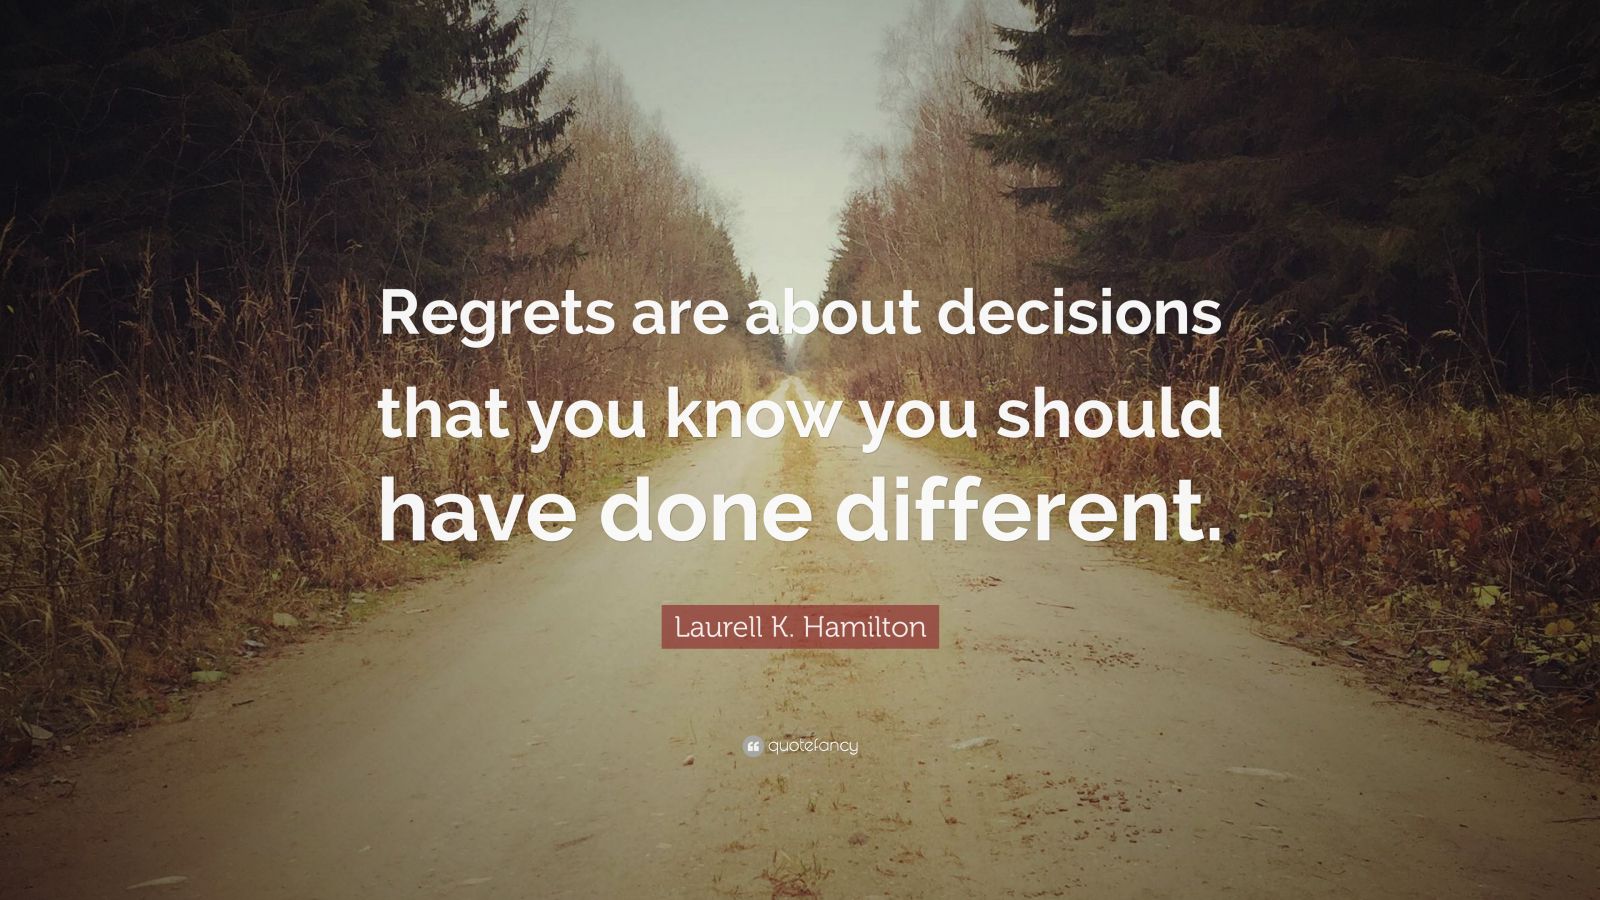 Laurell K. Hamilton Quote “Regrets are about decisions